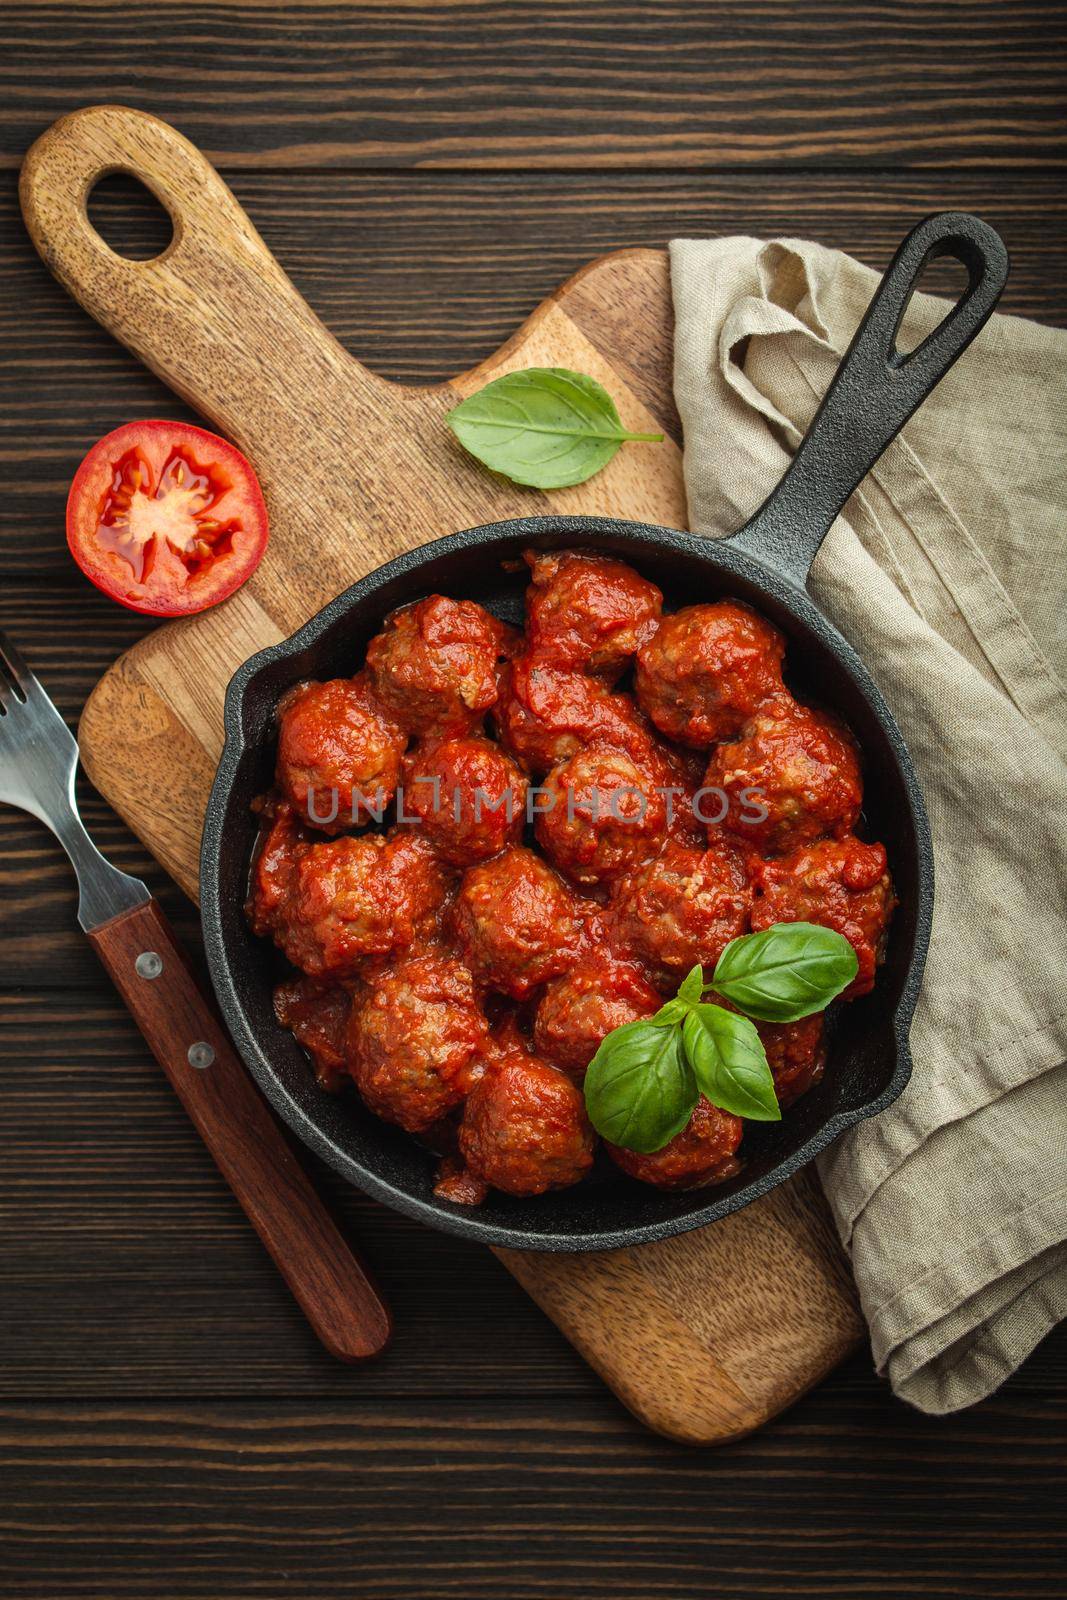 Top view of delicious meatballs with tomato sauce and fresh basil in cast iron rustic vintage pan served on cutting board, wooden background. Tasty homemade meatballs